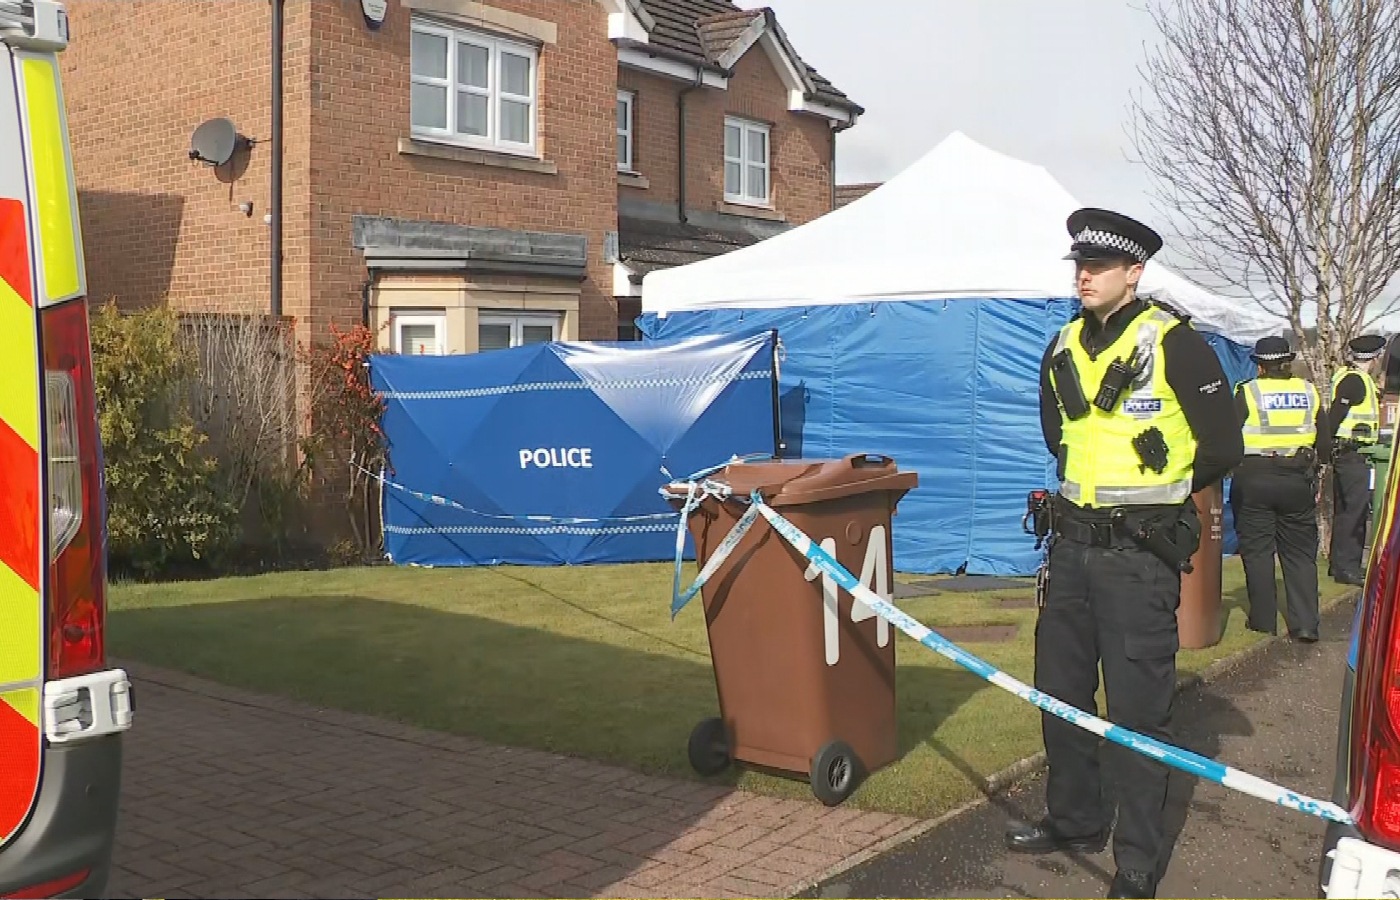 Police Scotland searched Nicola Sturgeon and Peter Murrell's home during their investigation into the SNP's funding and finances.